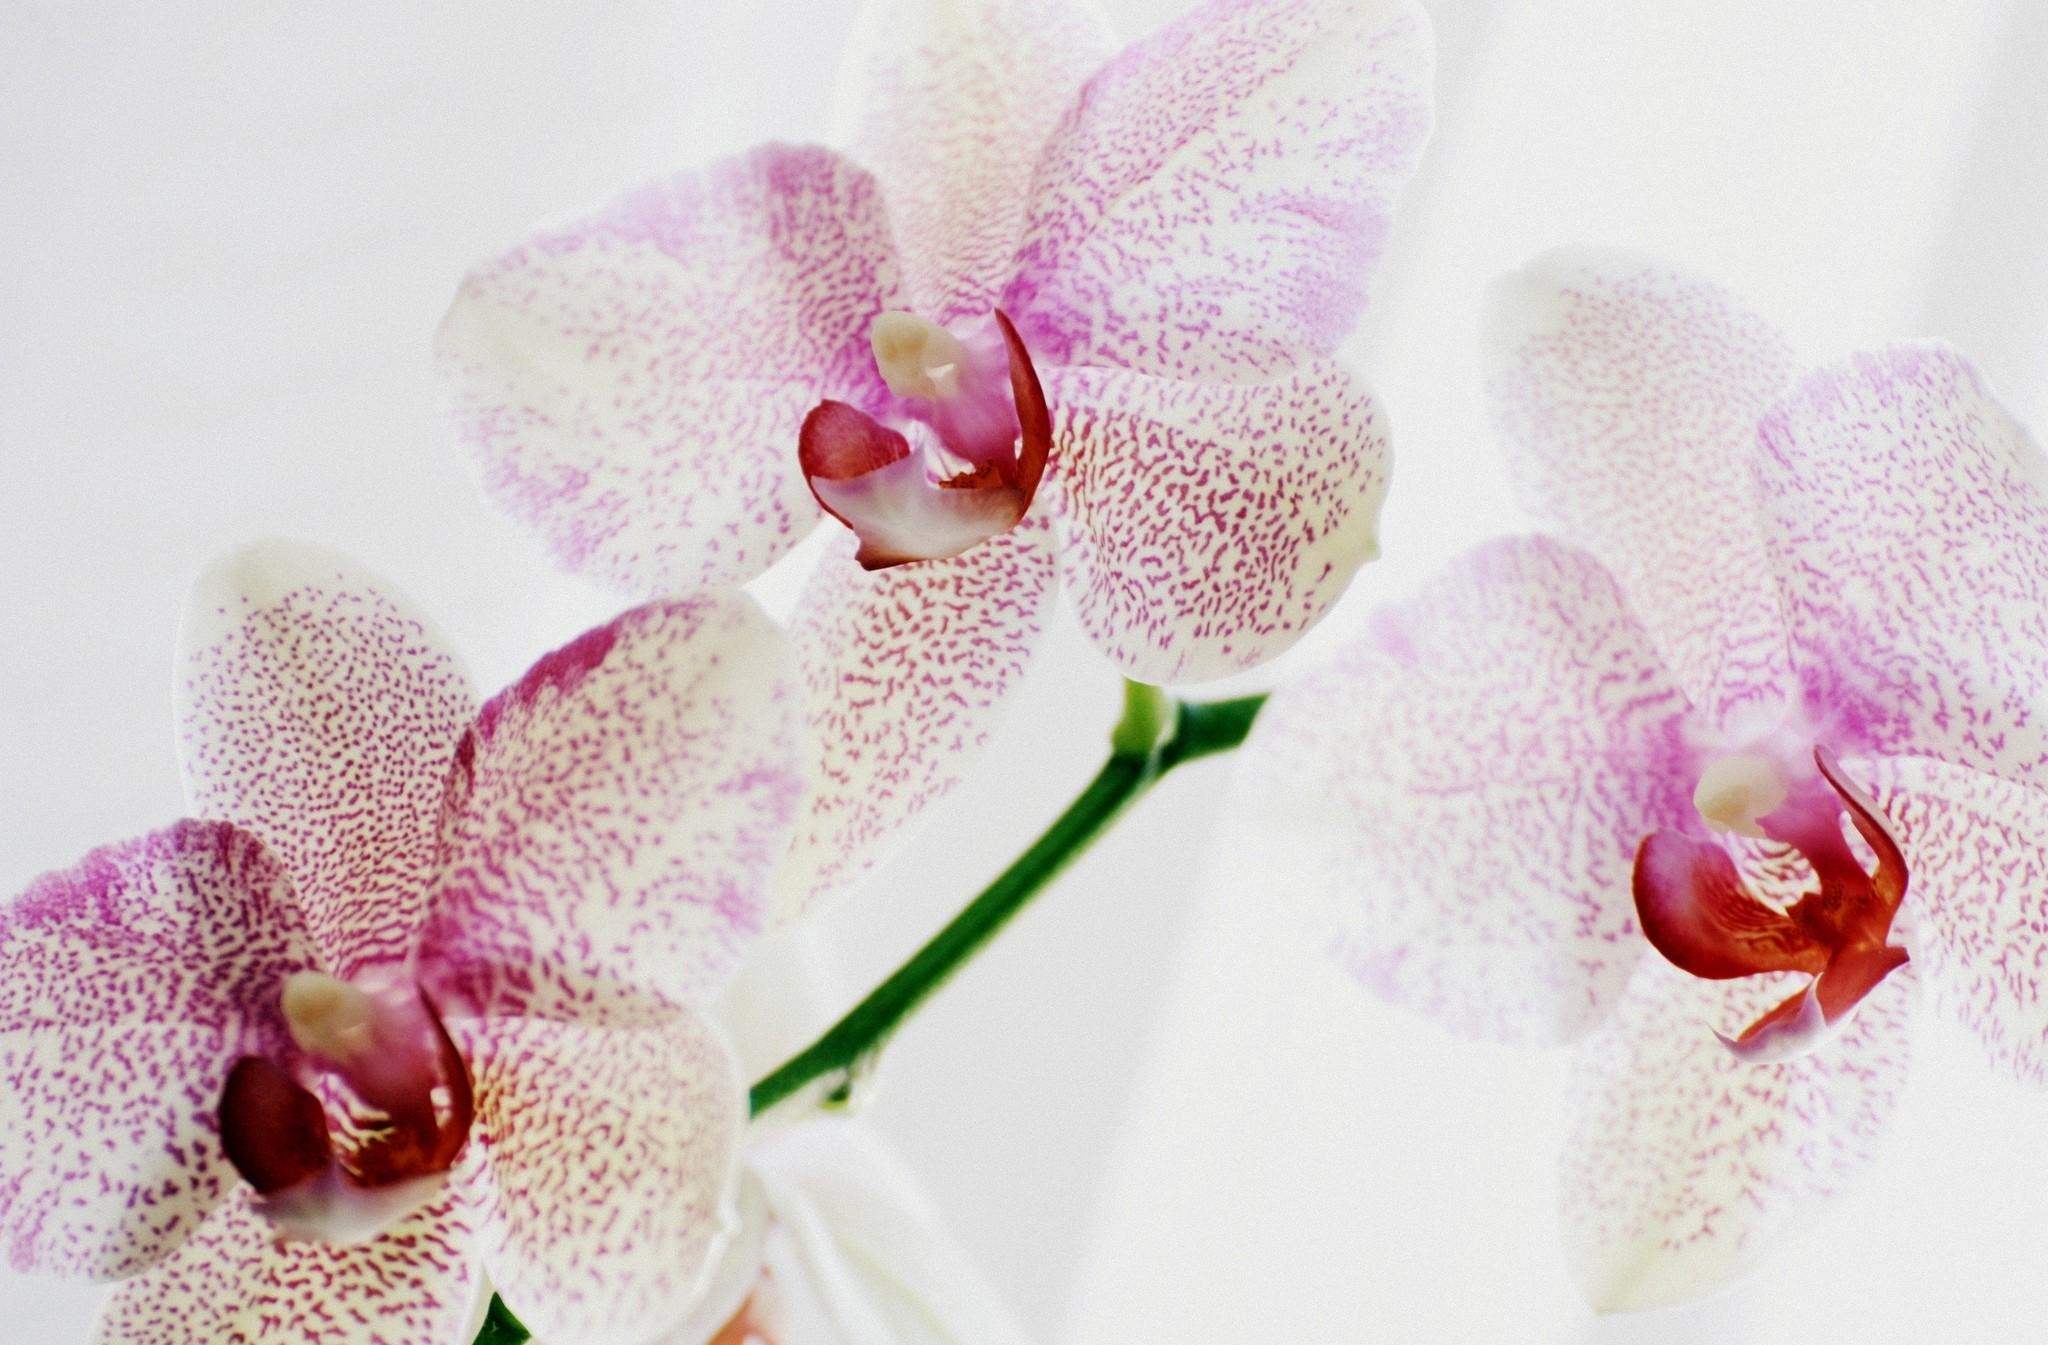 flowers, spotted, close up, orchid, exotic, exotics